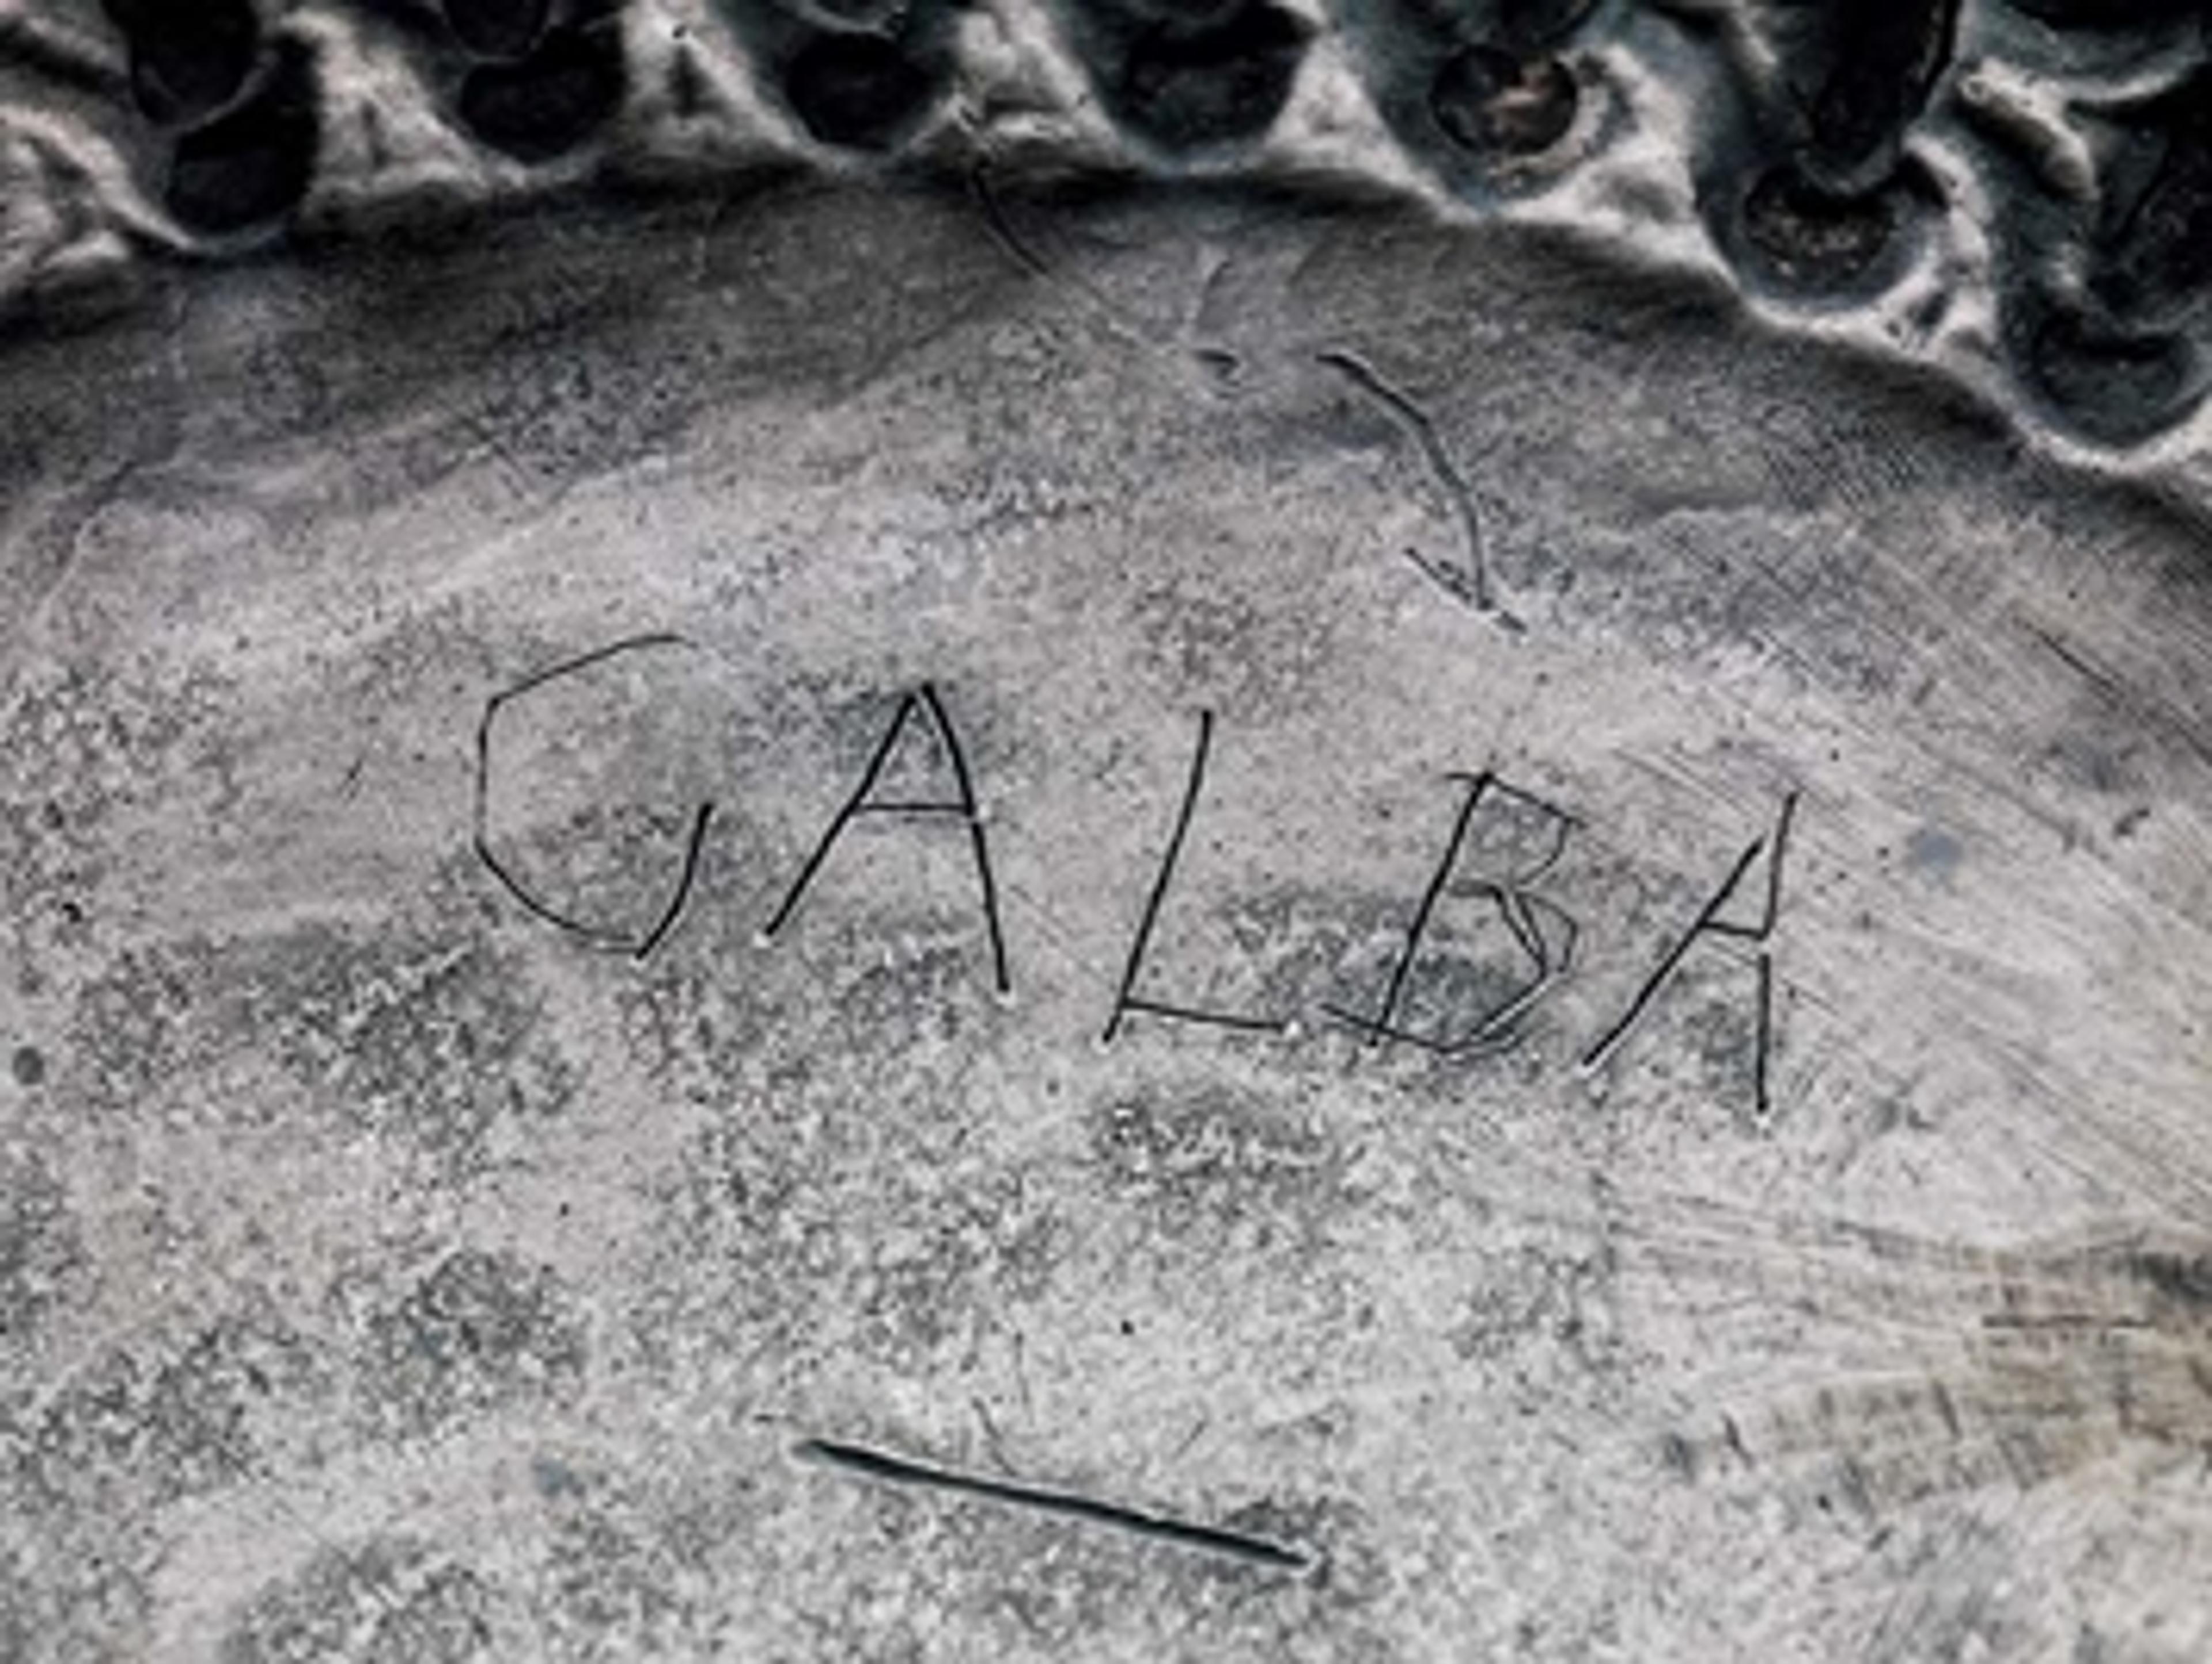 Galba's name inscribed on a cup